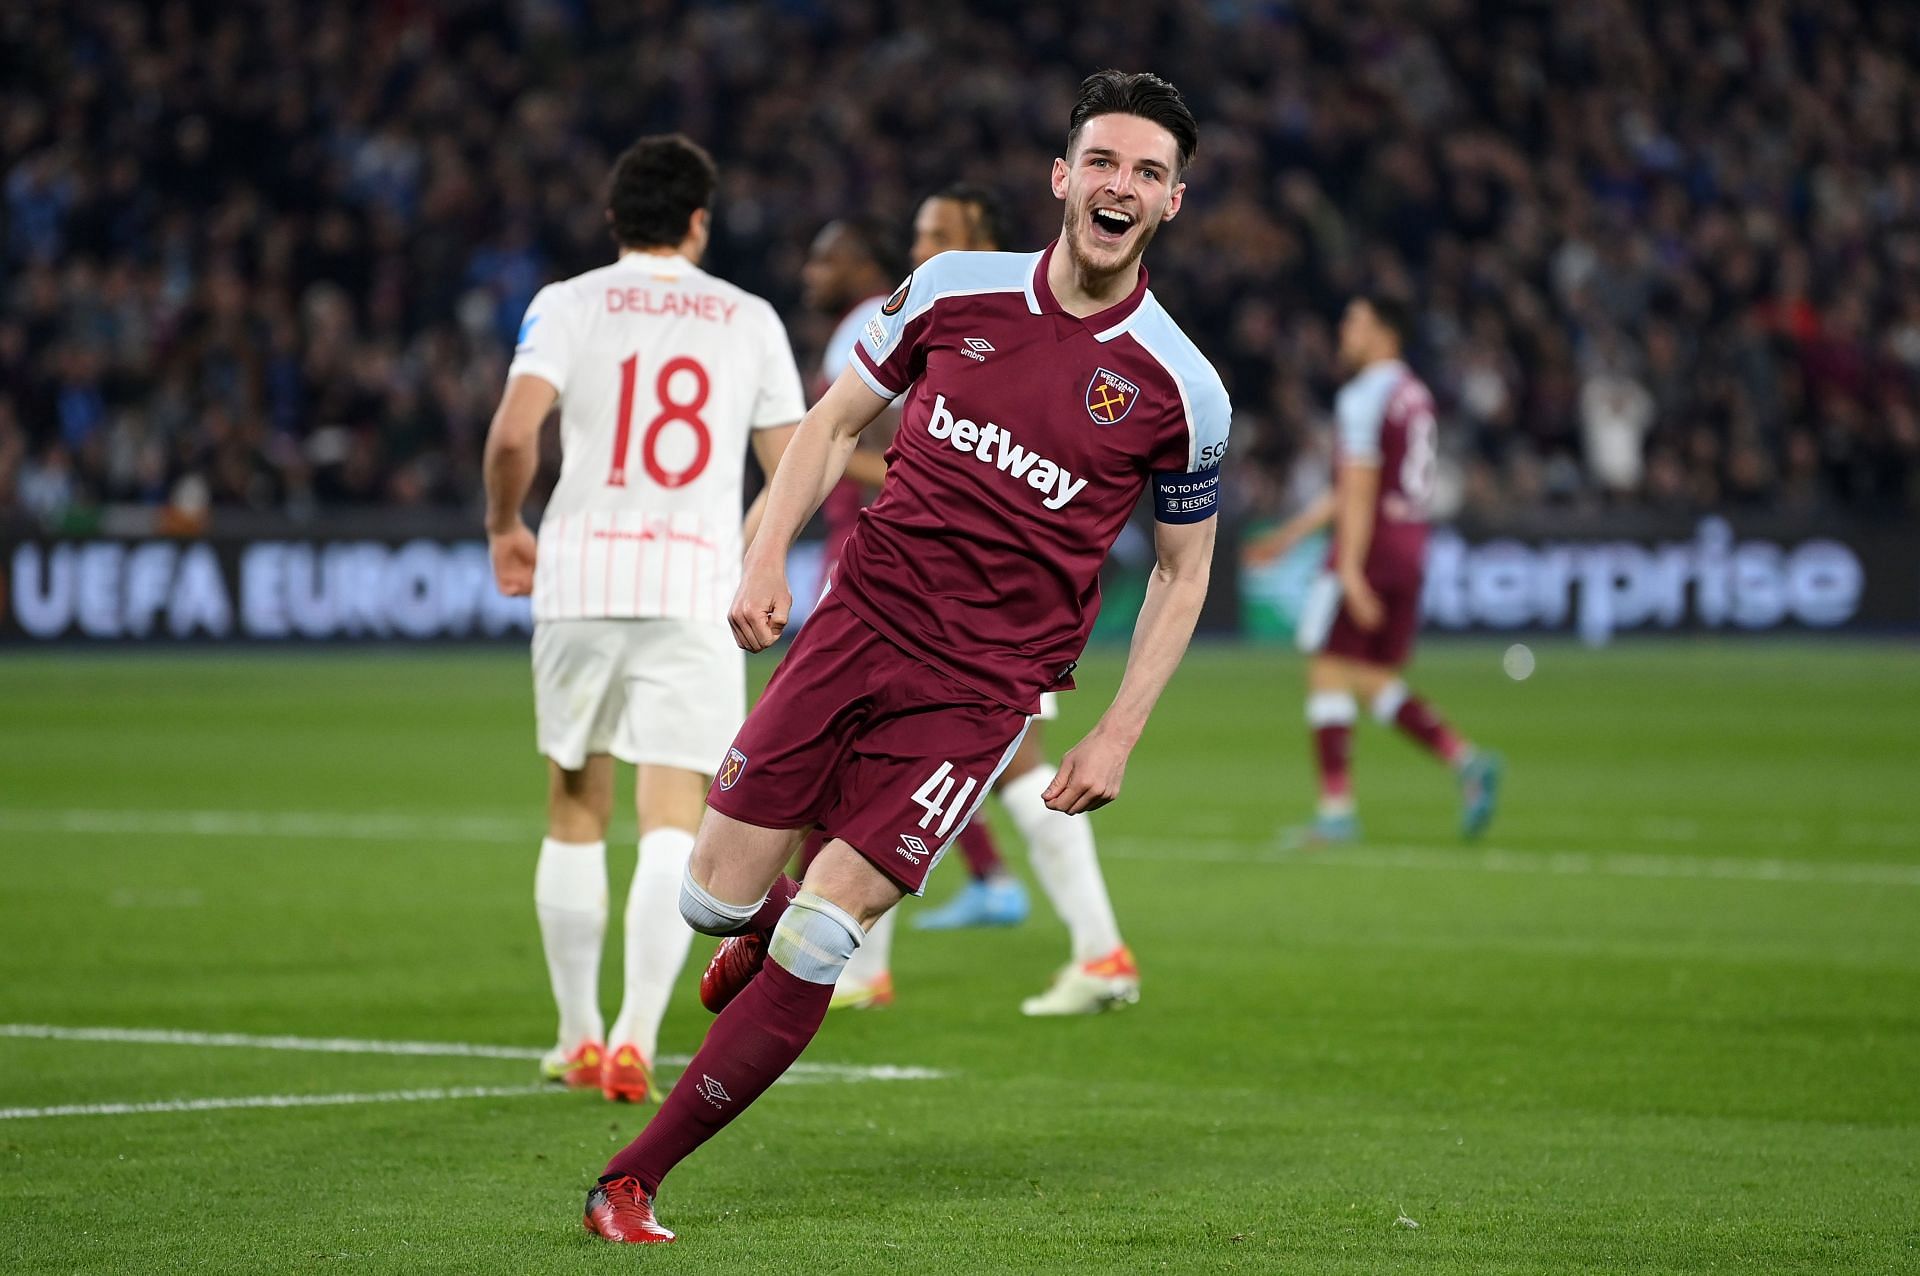 Declan Rice is hugely admired at Old Trafford